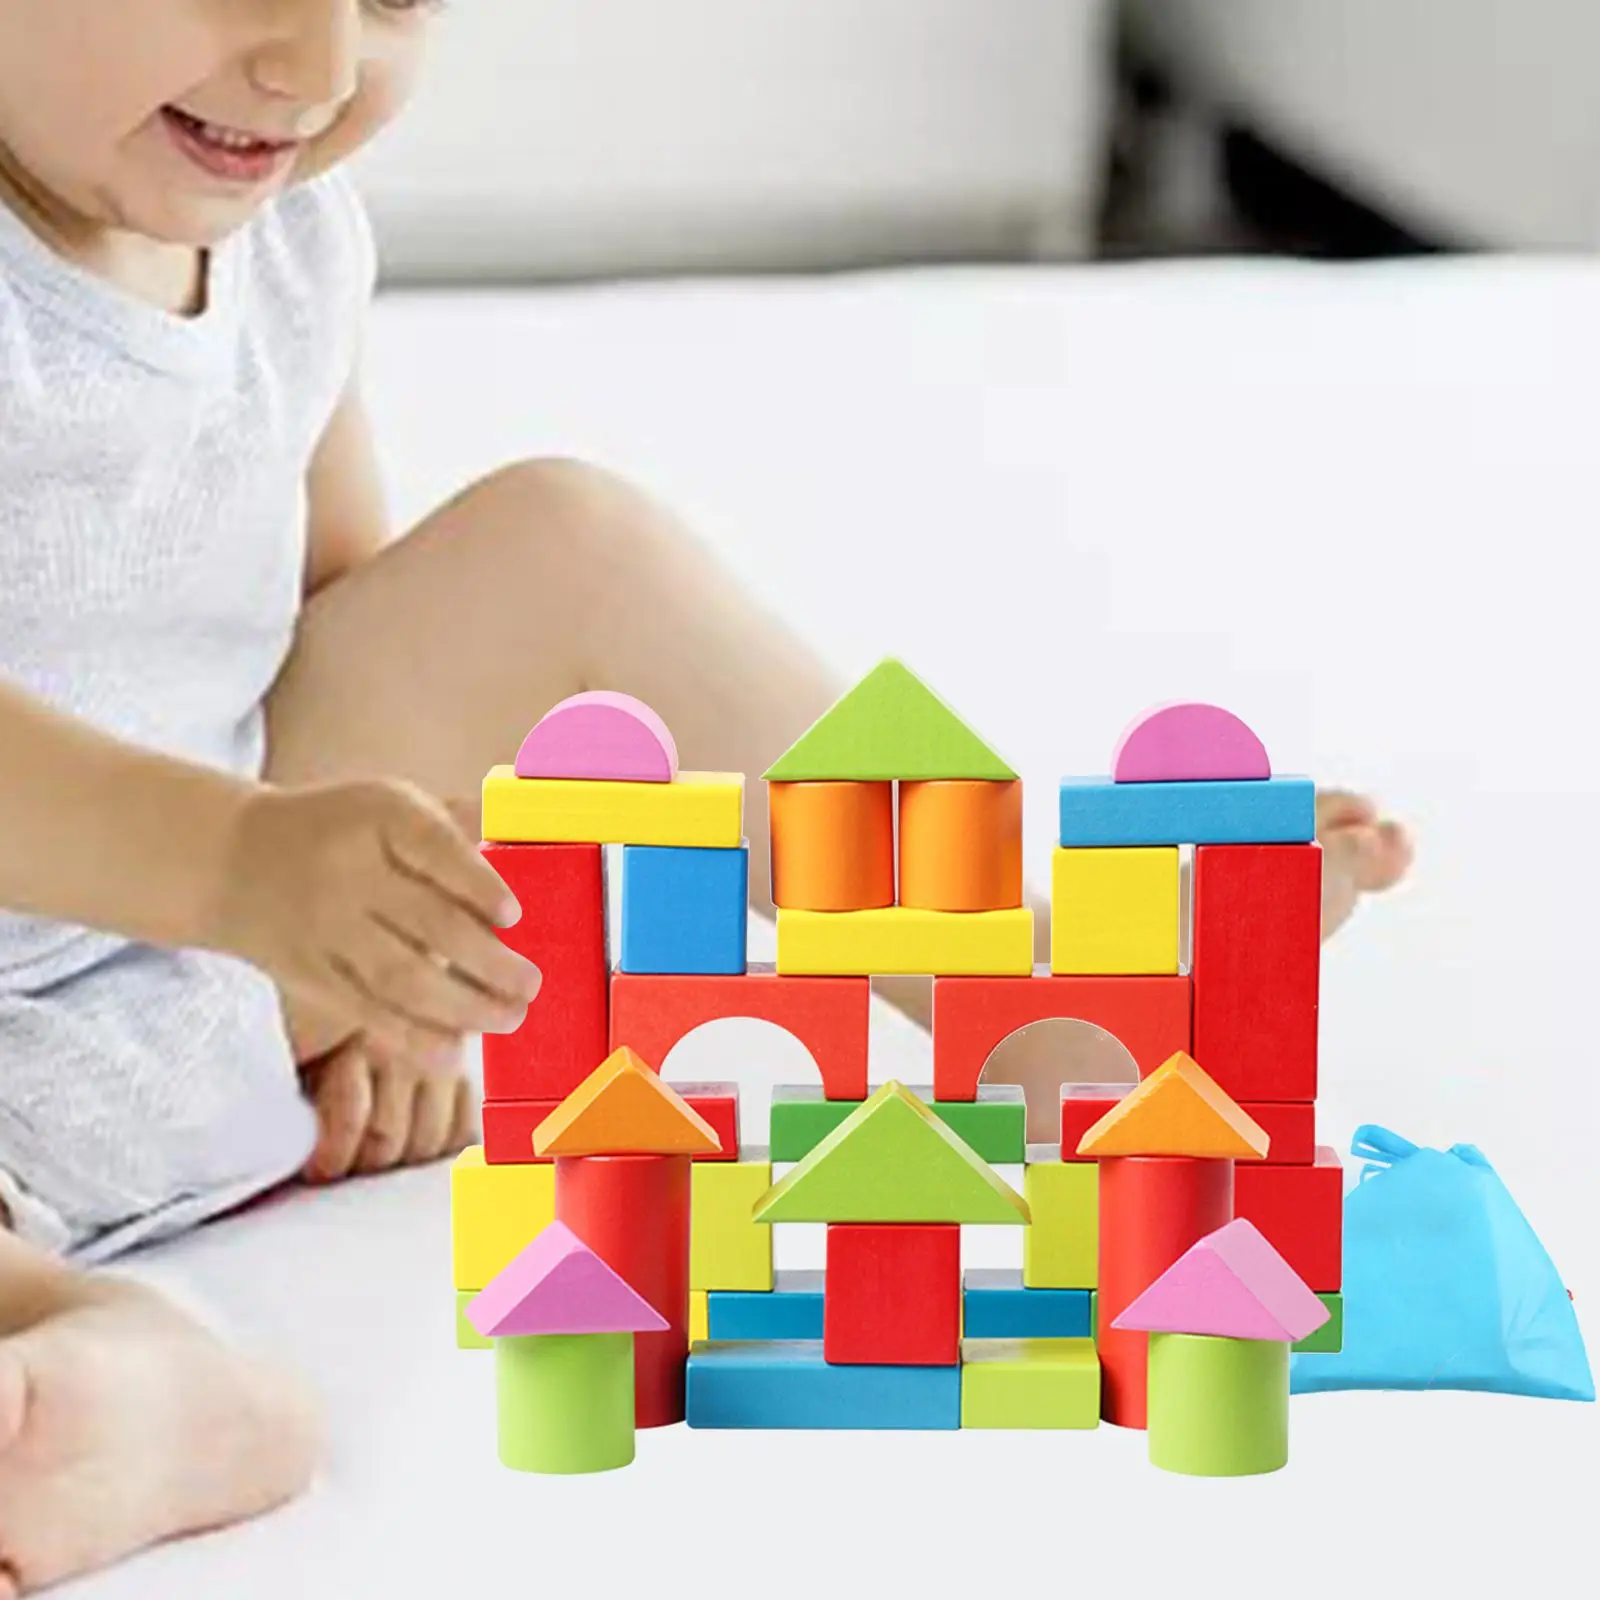 40Pcs Wooden Building Blocks Early Educational for Boys Children Gifts